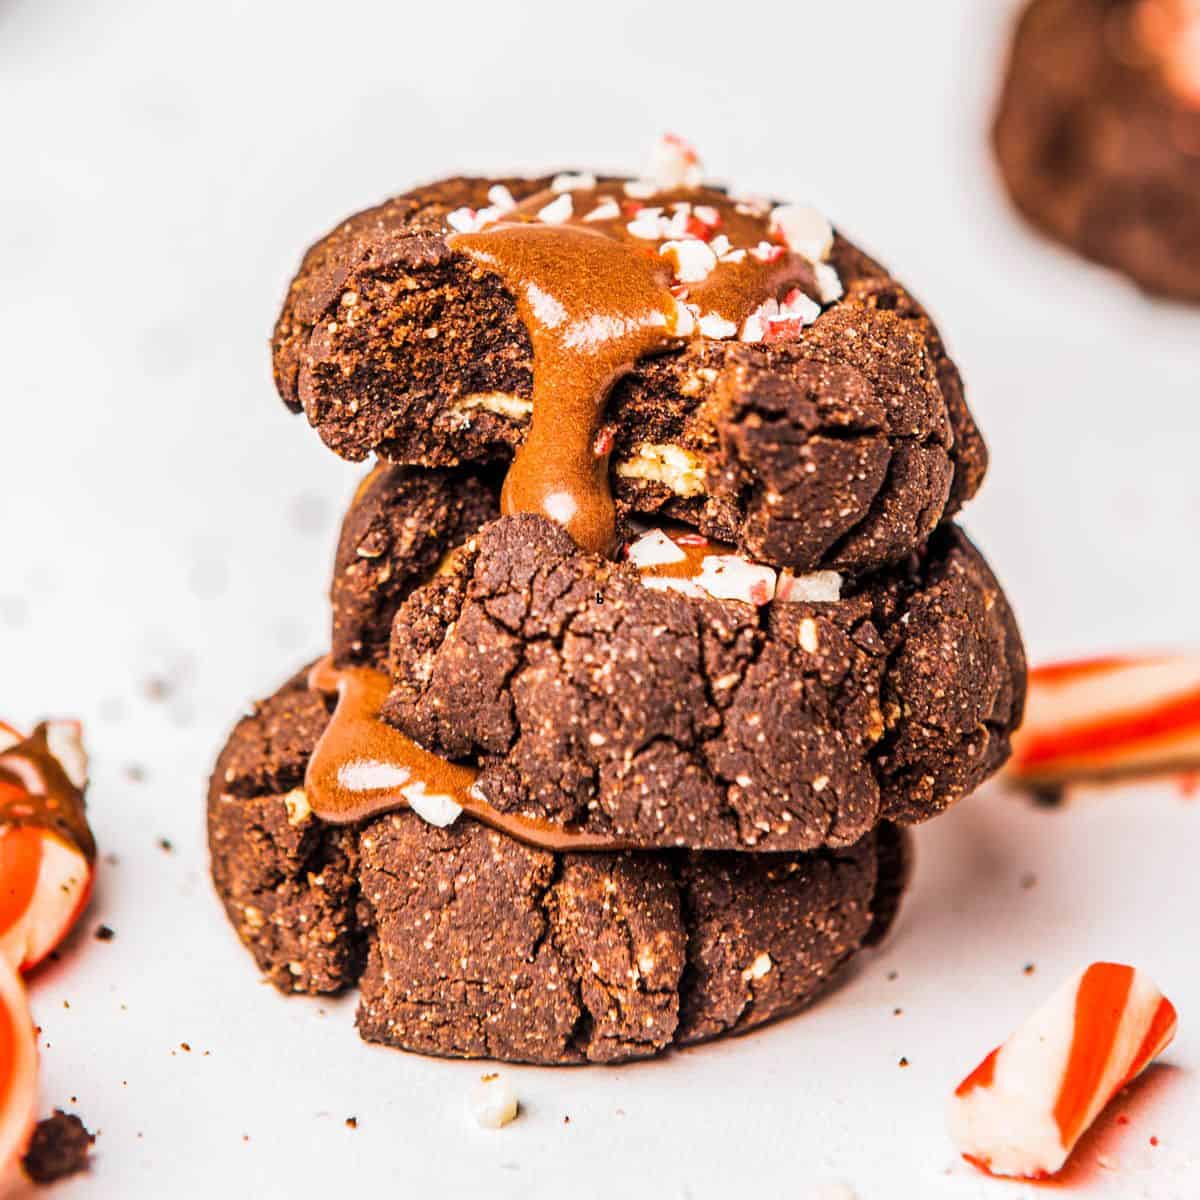 A stack of three healthier chocolate thumbprint cookies.